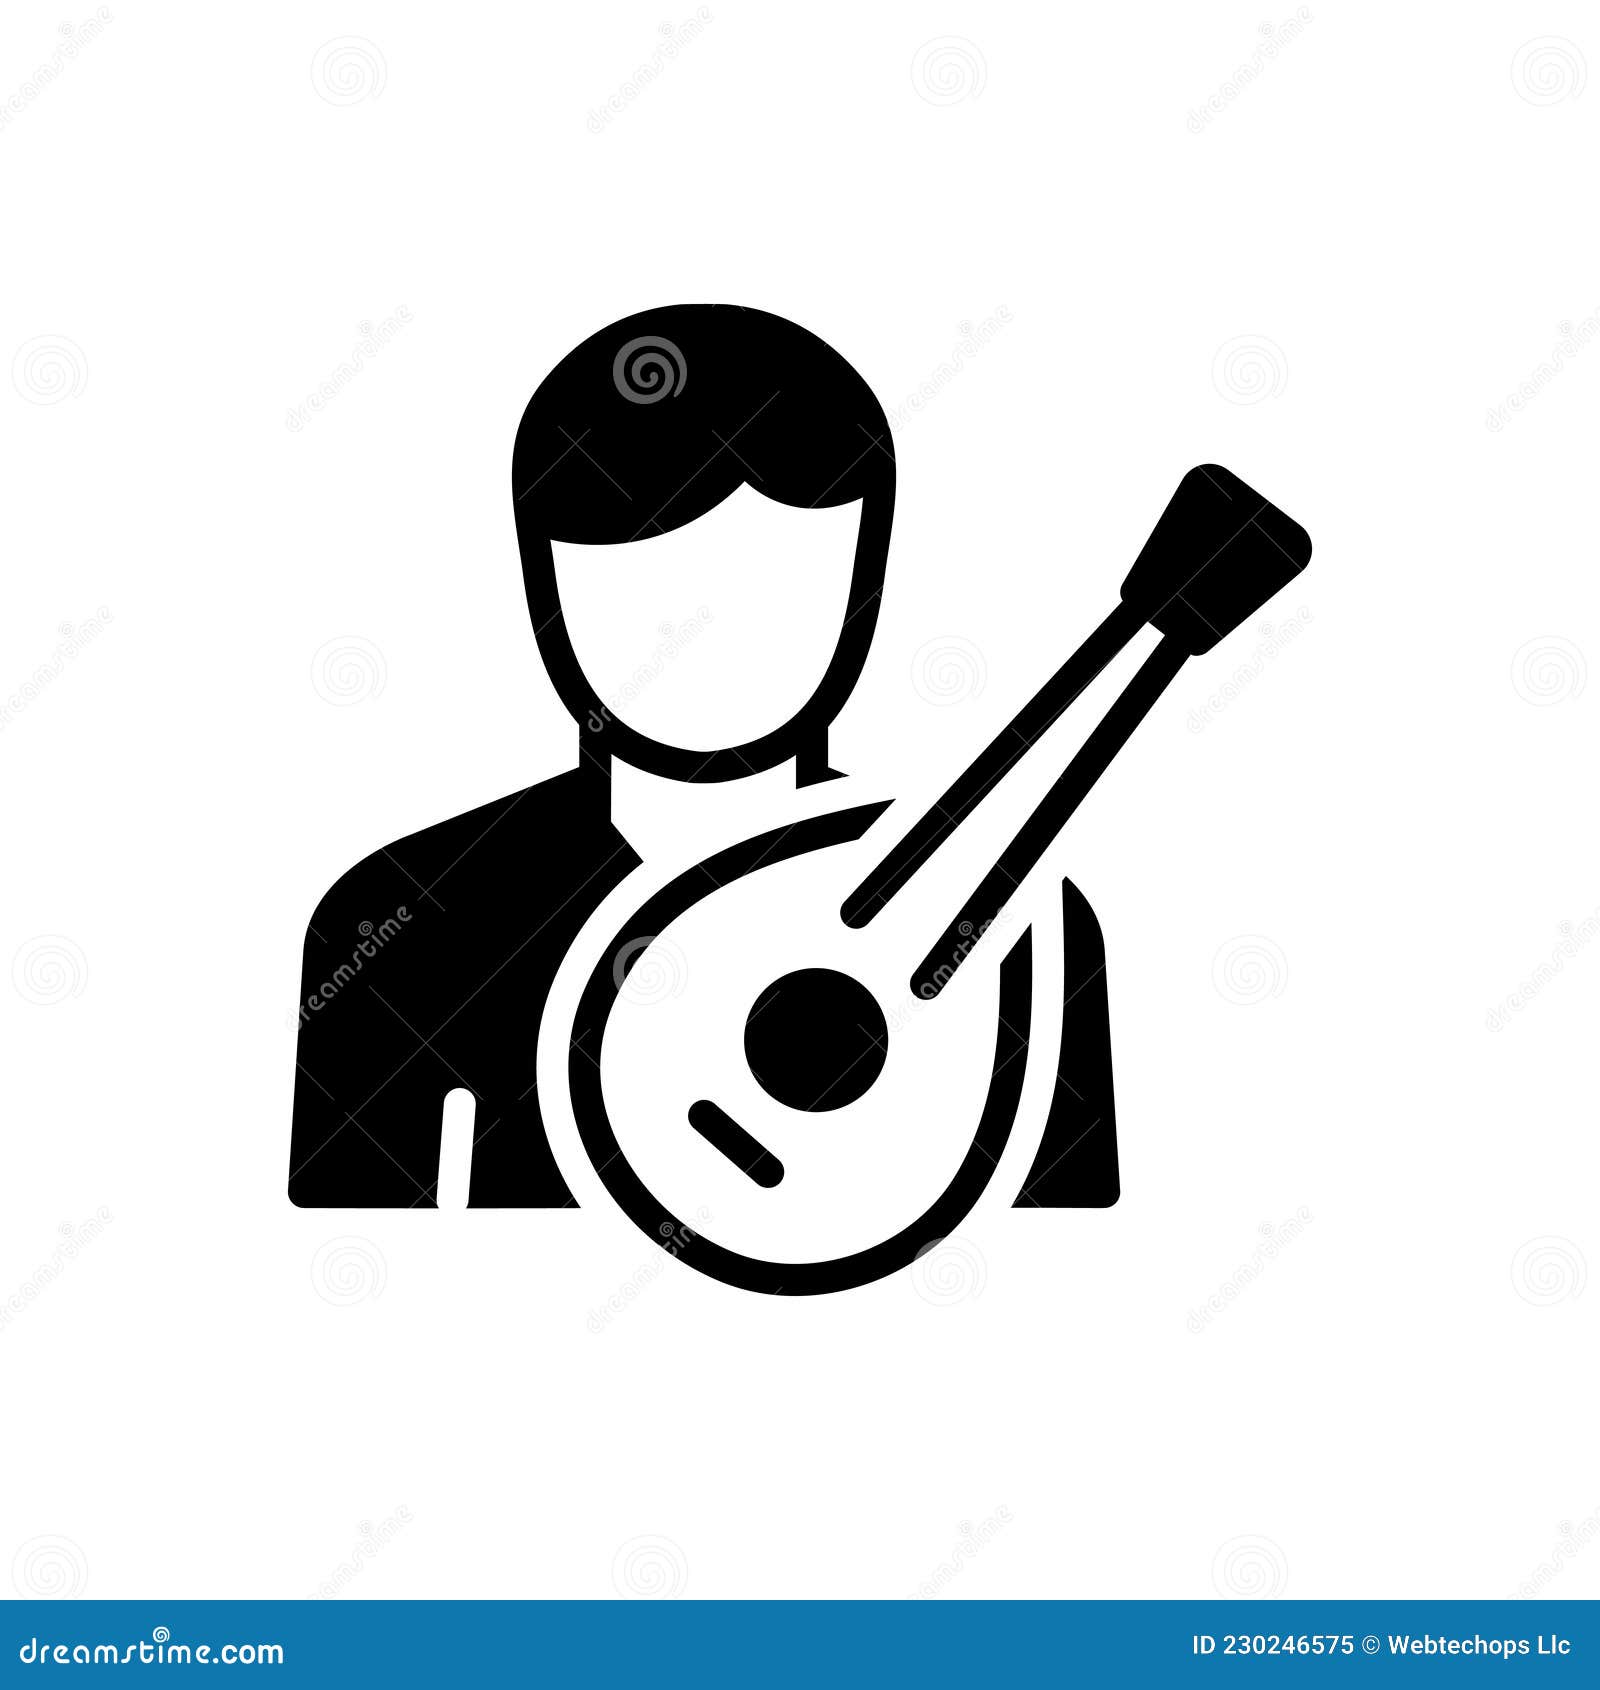 black solid icon for folk, musician and composer